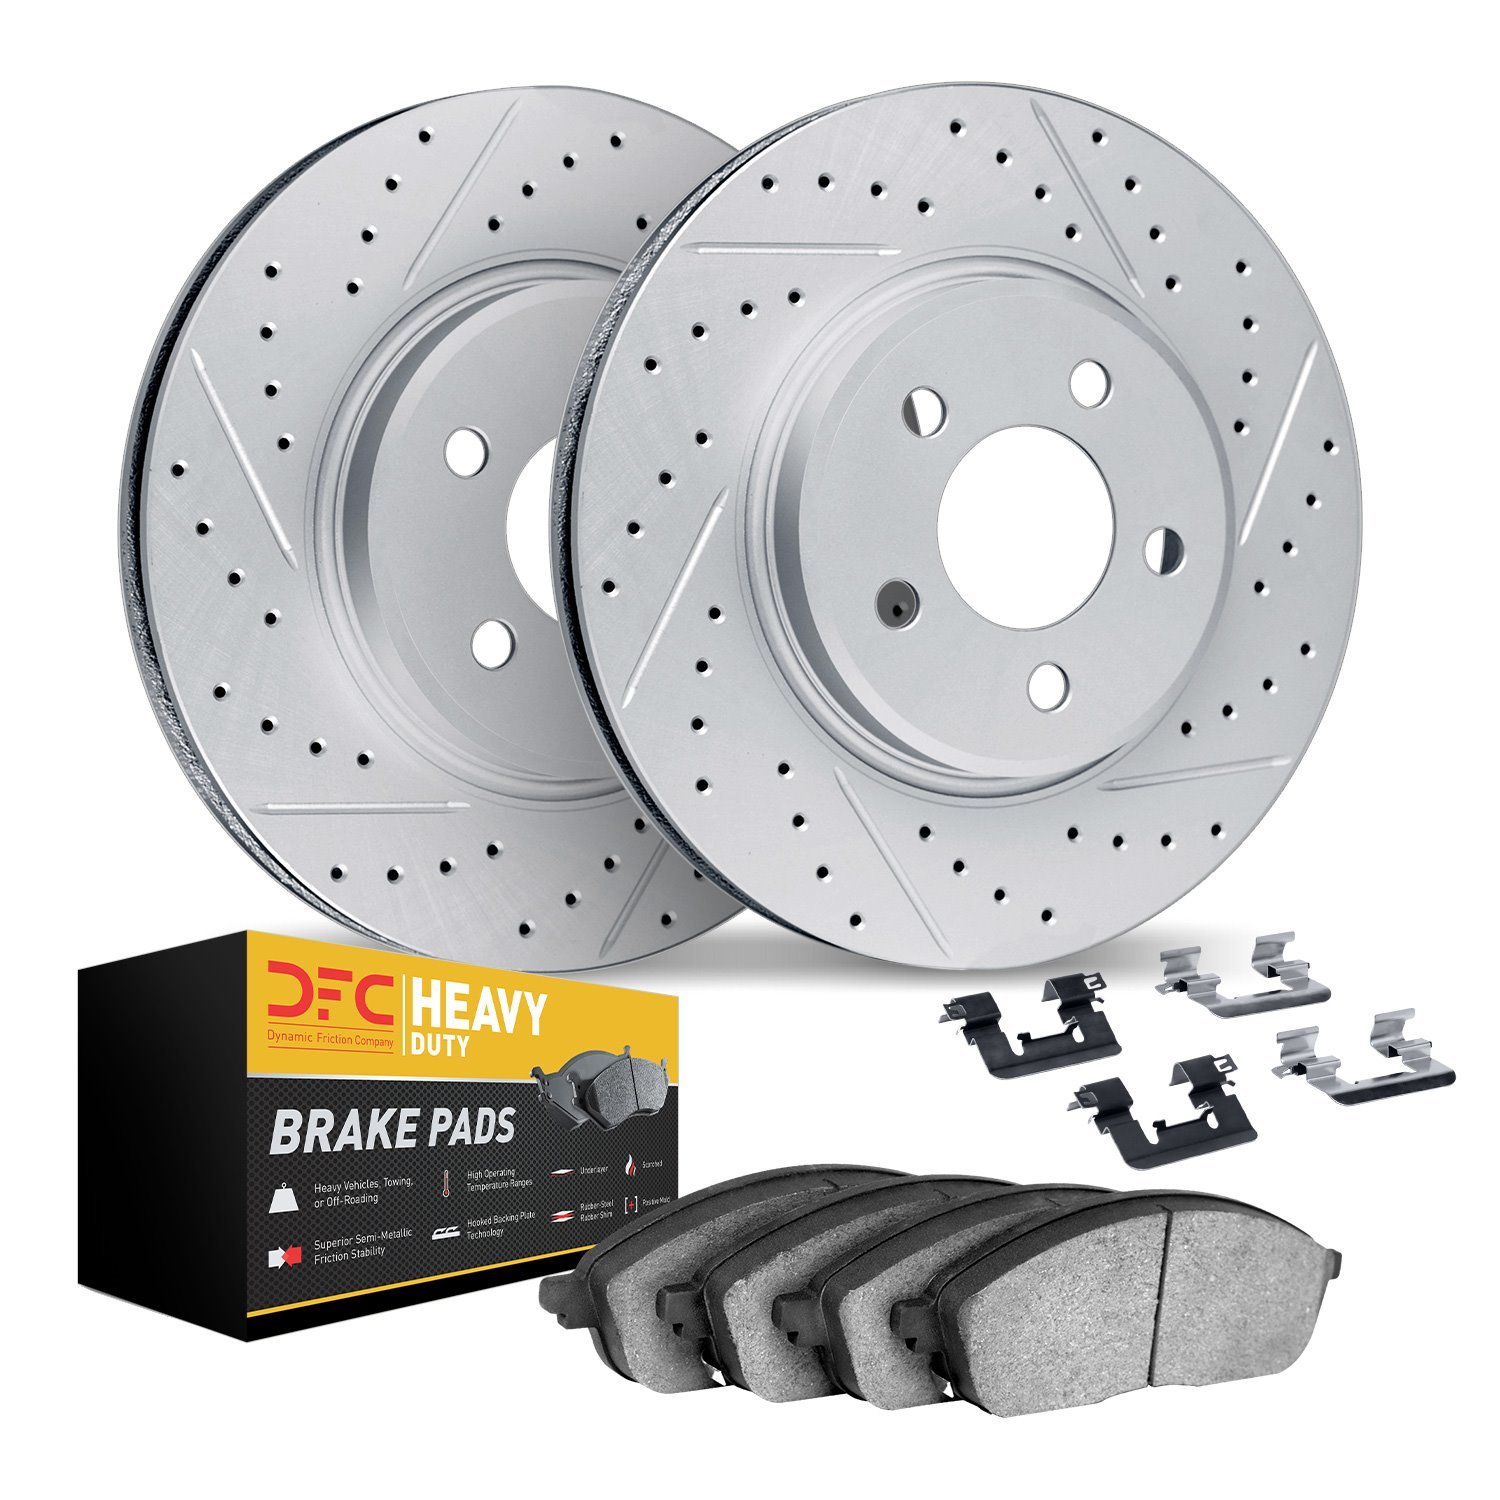 2212-55003 Geoperformance Drilled/Slotted Rotors w/Heavy-Duty Pads Kit & Hardware, 2003-2005 Ford/Lincoln/Mercury/Mazda, Positio